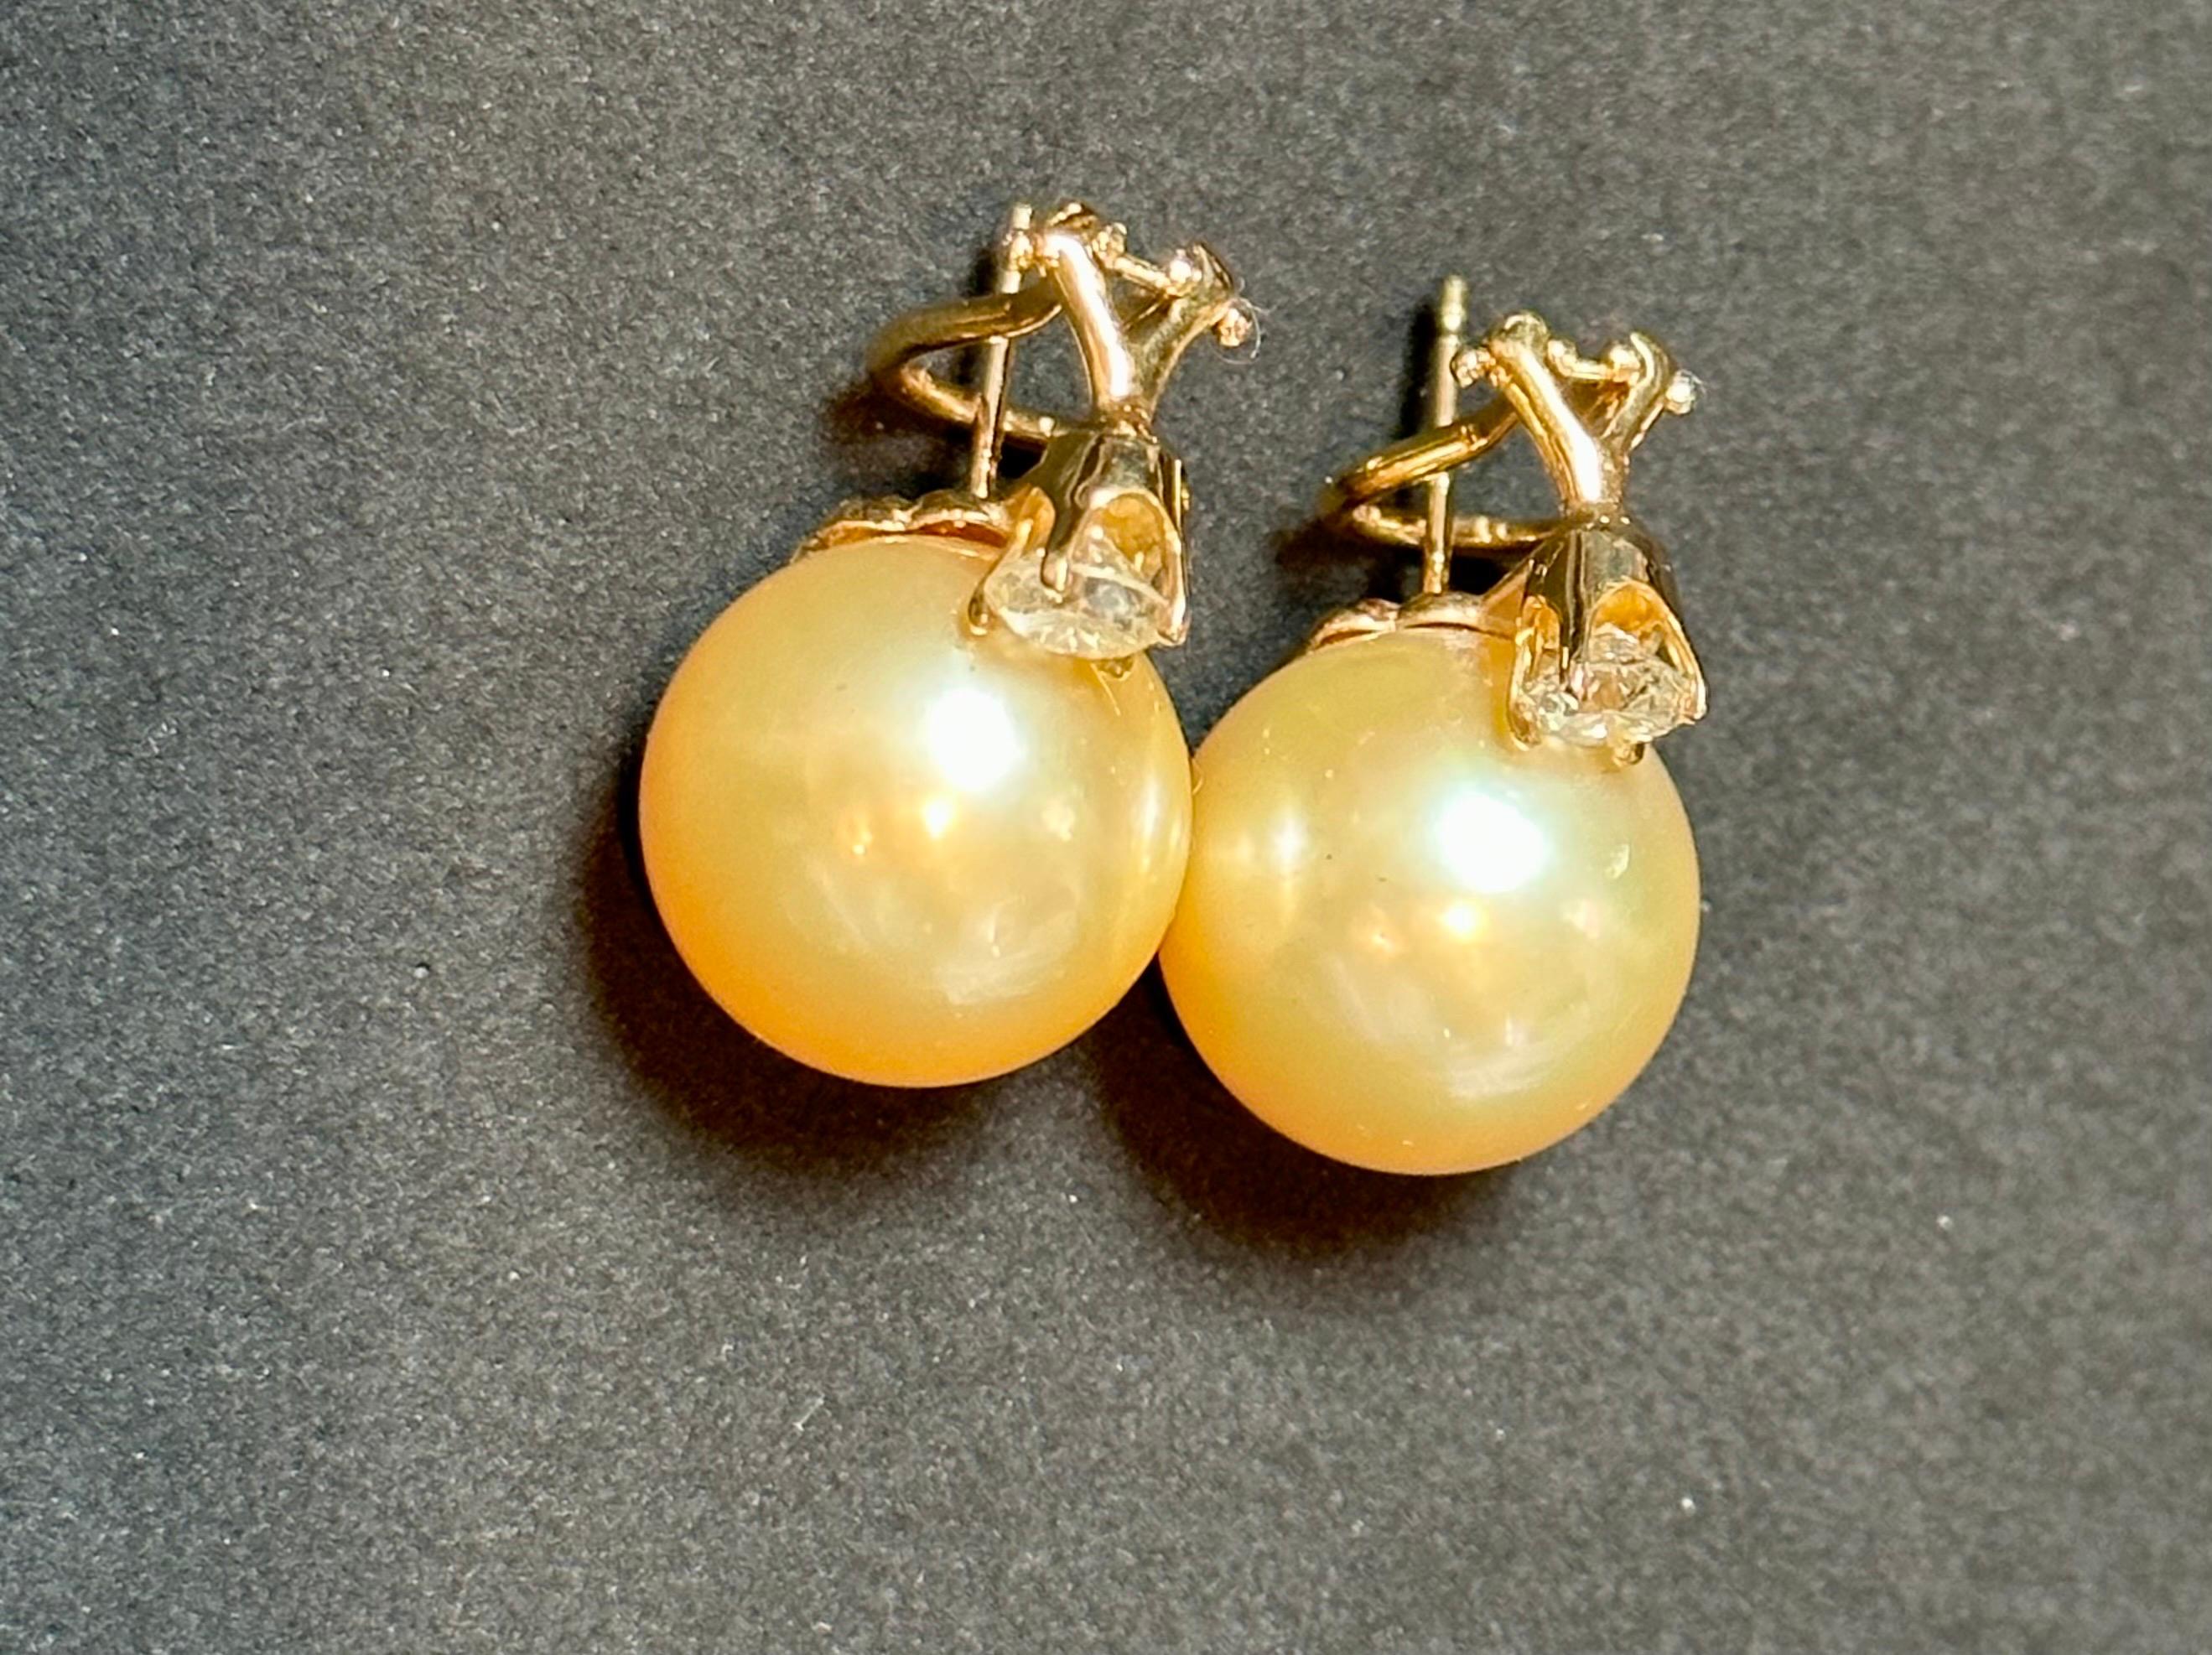 Introducing the stunning 14 Karat Yellow gold 15mm Round Golden South Sea Pearl & 1 Ct Total Diamond Cocktail Stud Earrings. These exquisite earrings are a true work of art, showcasing a magnificent estate piece.

Crafted with utmost precision,